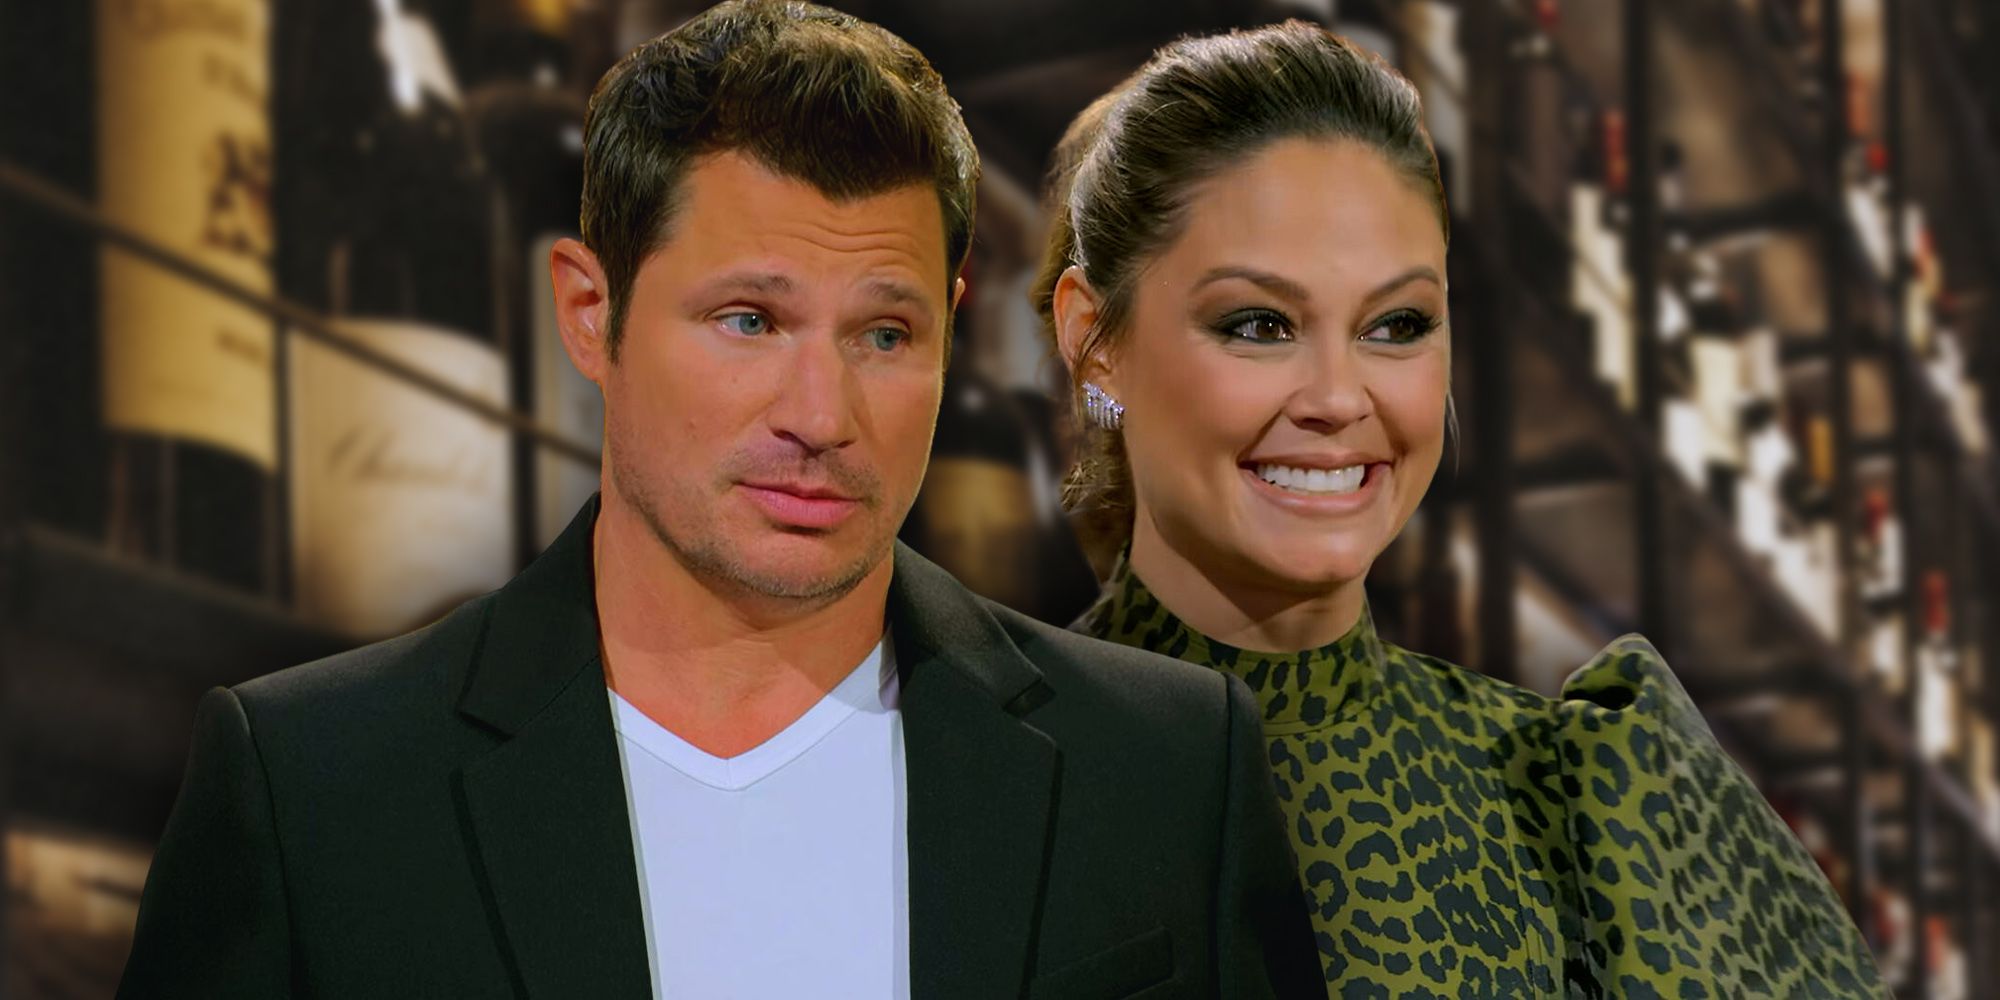 Love Is Blind's Nick Lachey looking surprised and Vanessa Lachey smiling